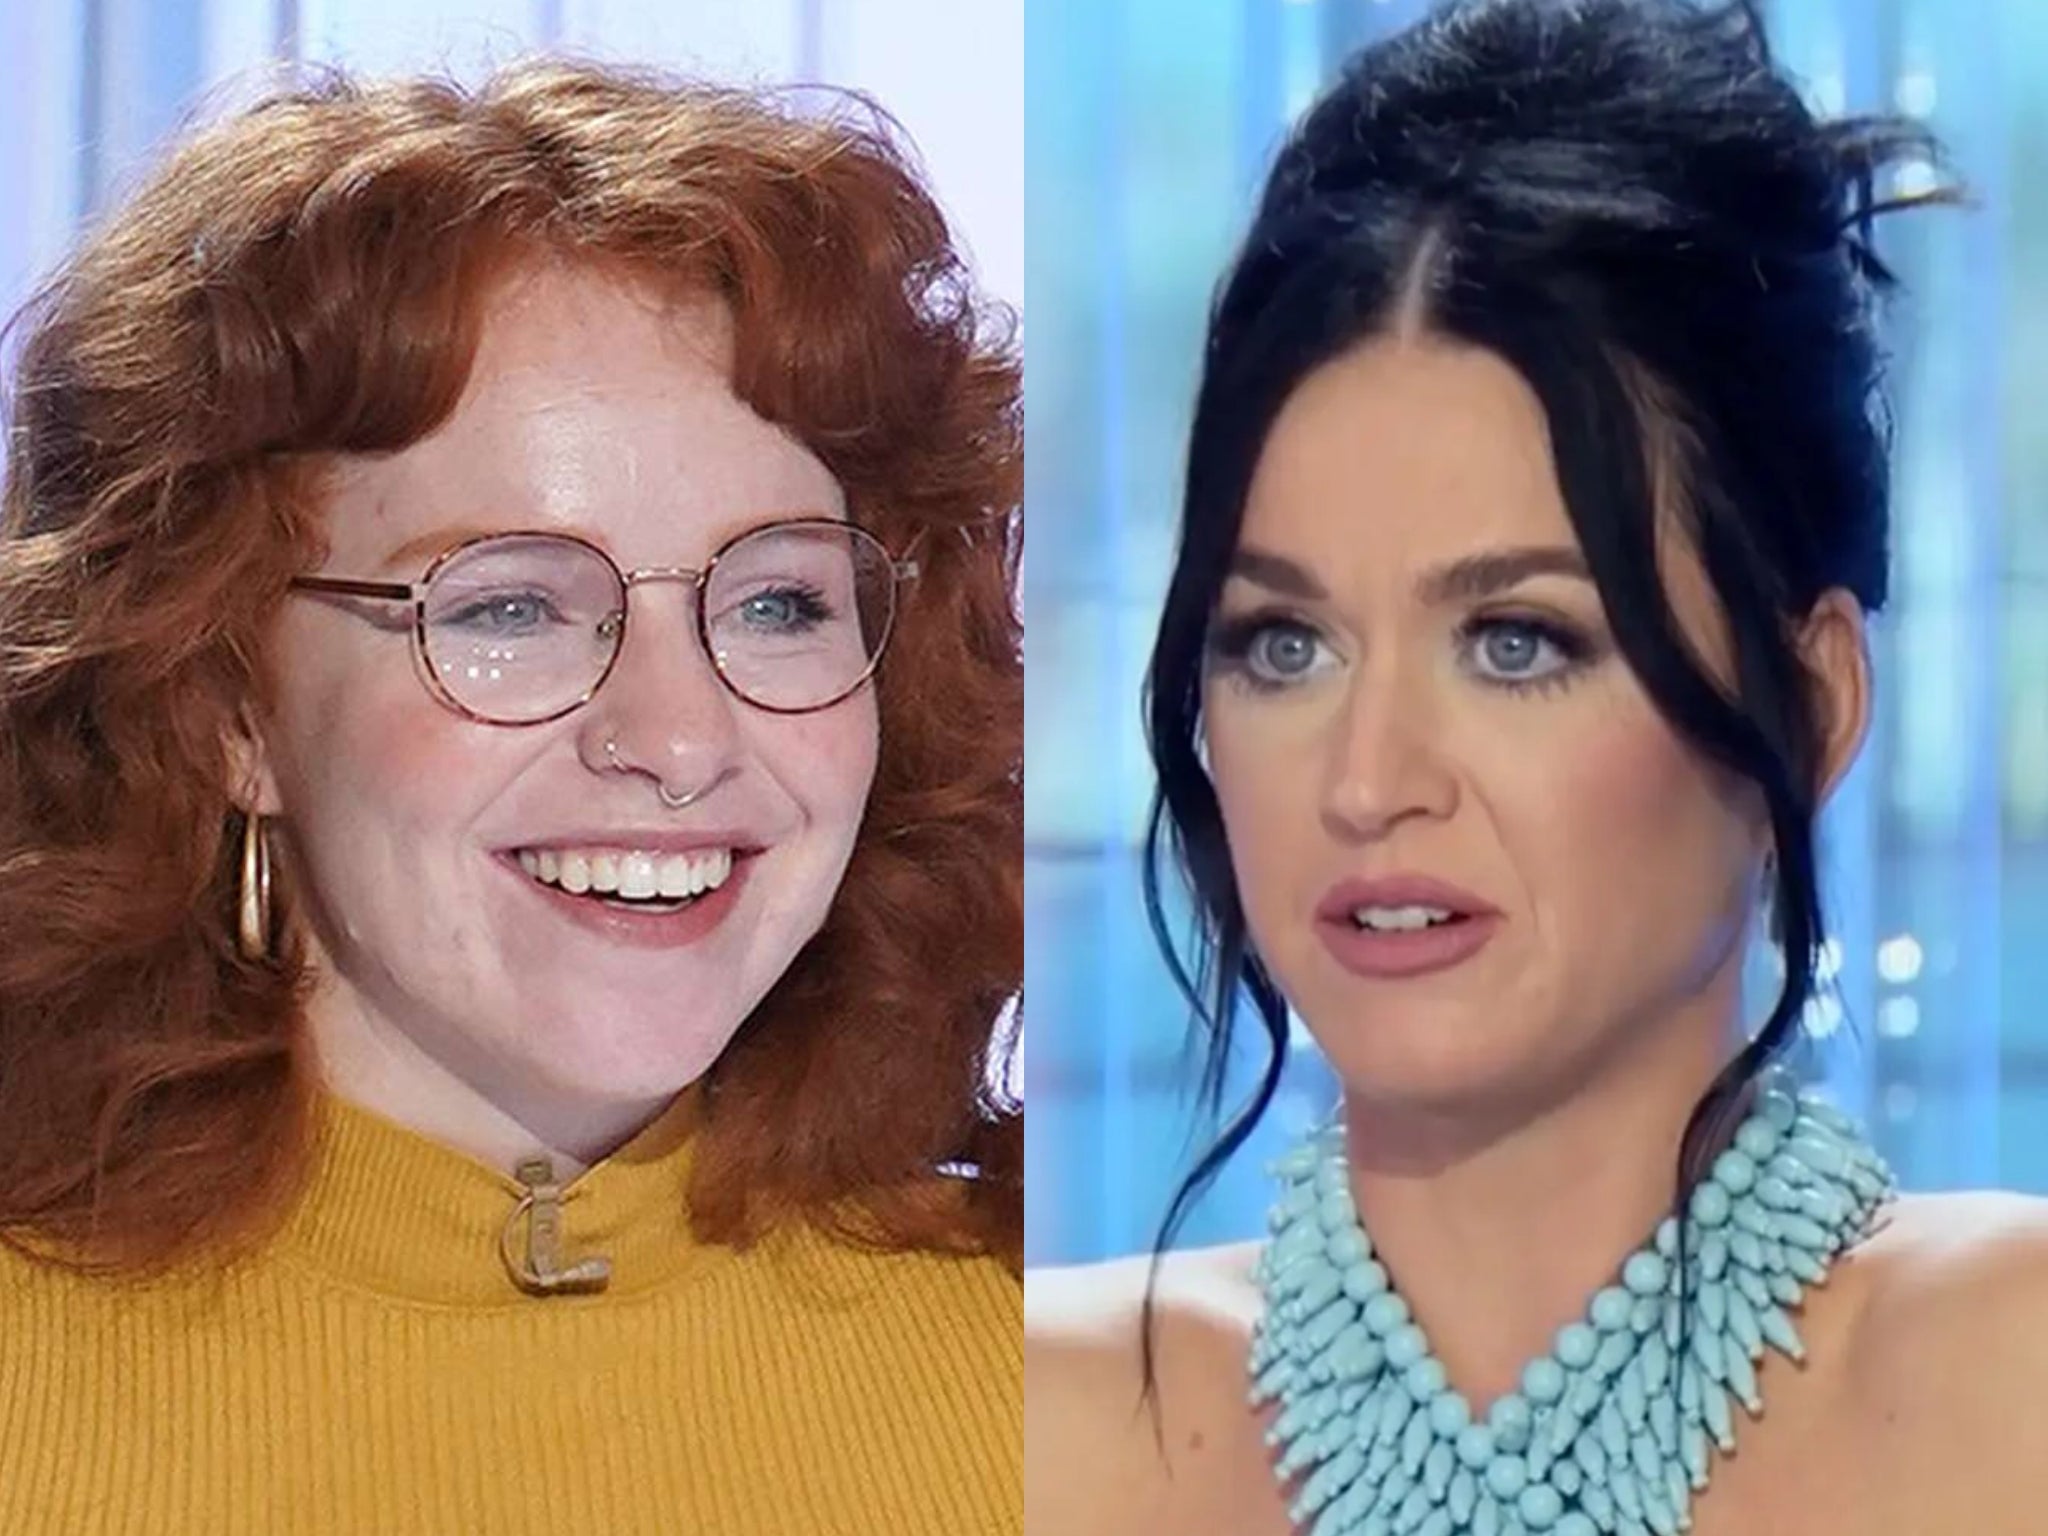 Sarah Beth Liebe and Katy Perry